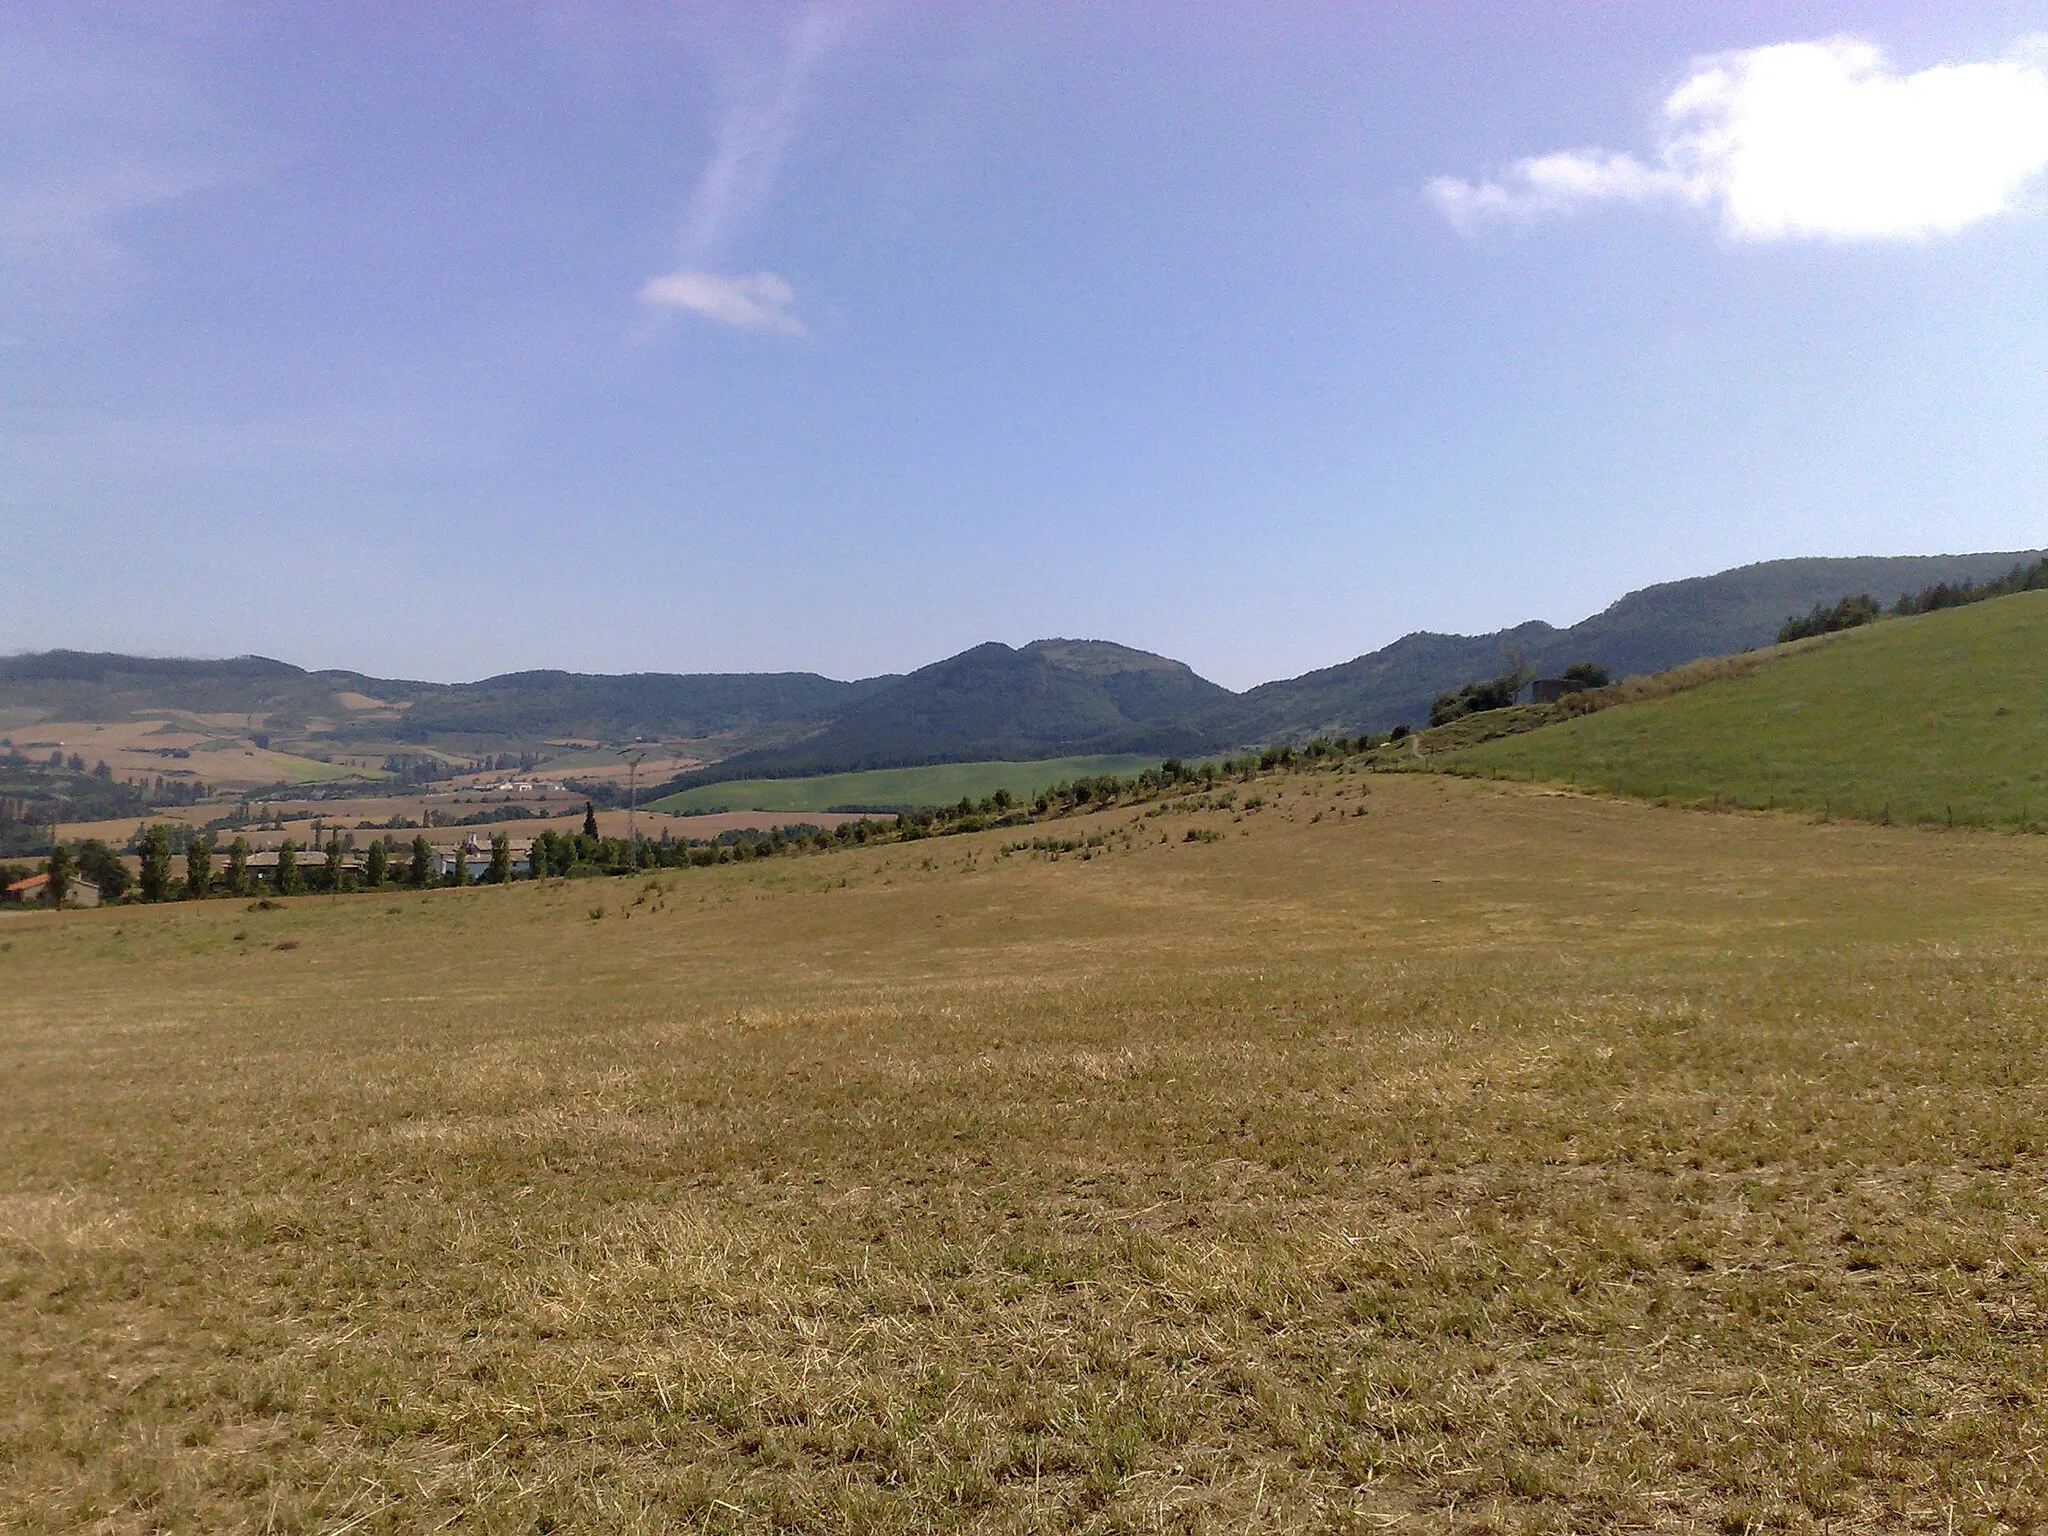 Photo showing: Mount Irulegi in the middle seen from the way from Labio (es Labiano) to mt. Pagadi, Aranguren, Navarre, Basque Country.